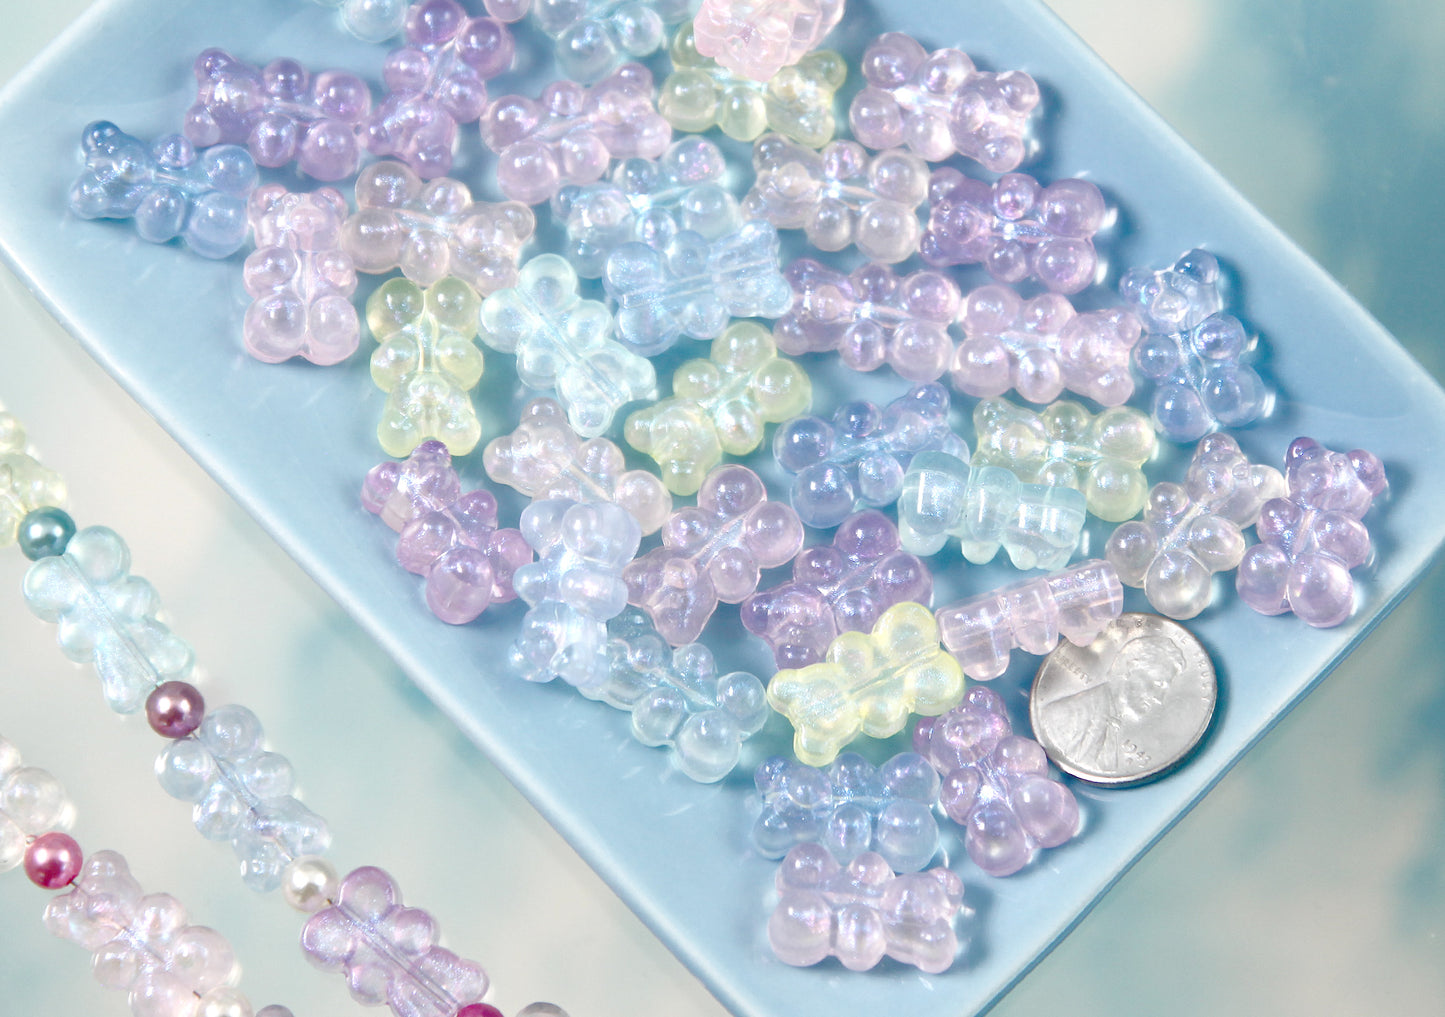 Pastel Gummy Bear Beads - 18mm Pastel Shimmer Fake Gummy Bears with Hole for Stringing - Fake Candy Resin Beads - 24 pc set